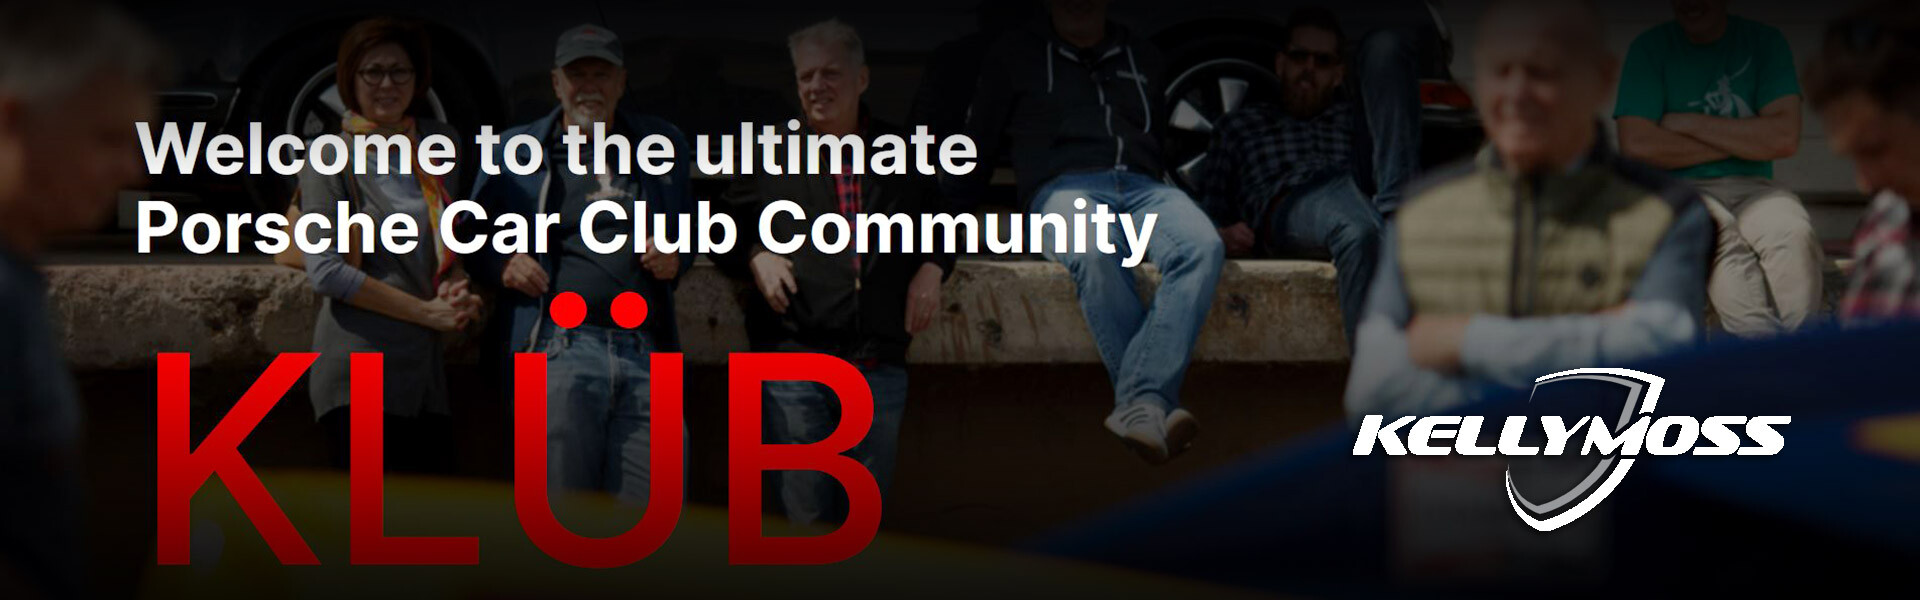 Join the ultimate Porsche car club